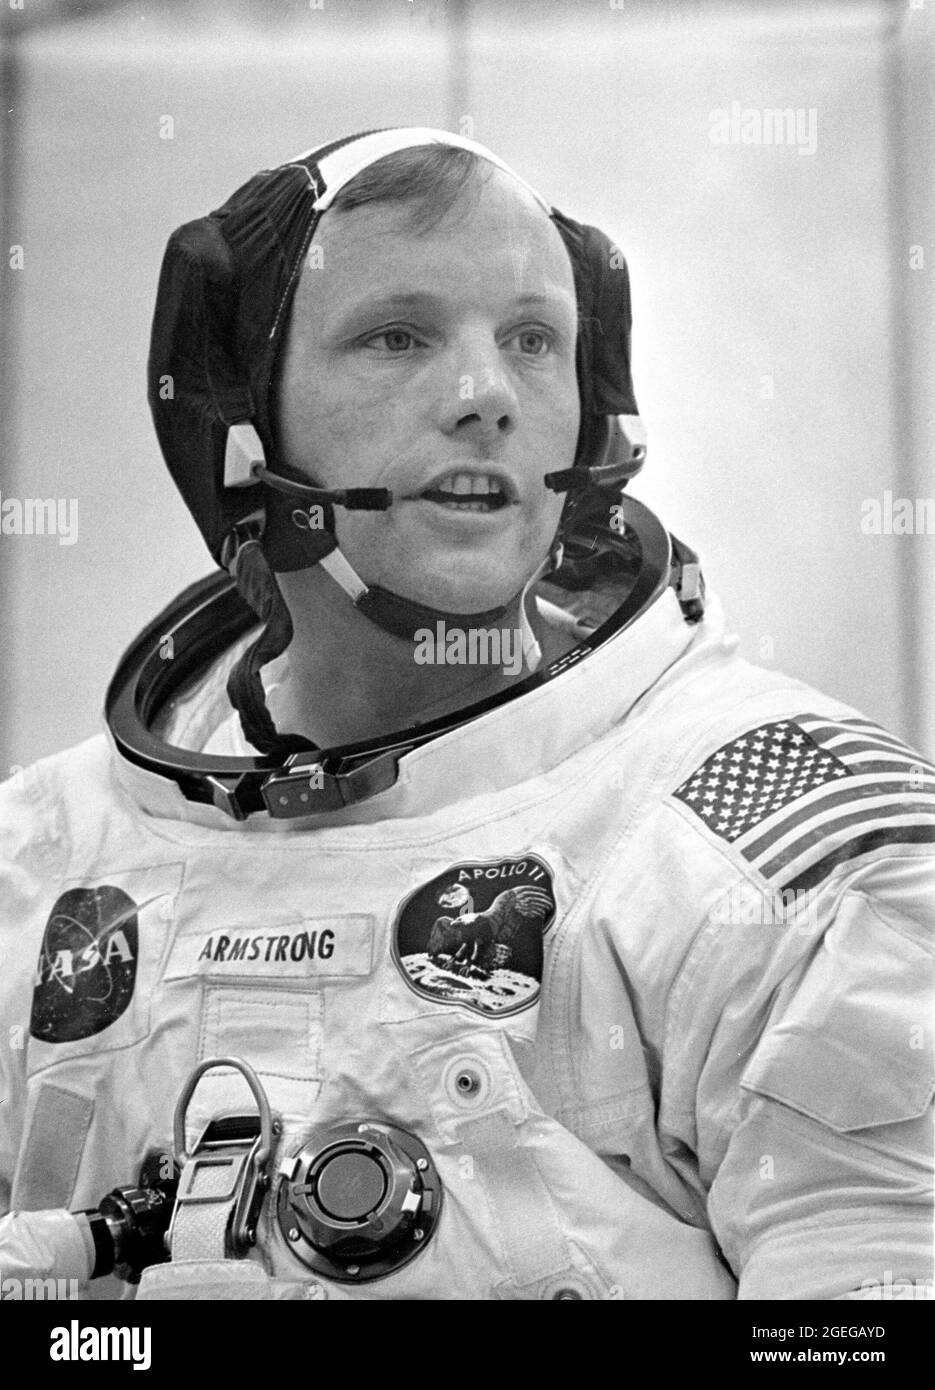 Dunned in his space suit, mission commander Neil A. Armstrong does a final check of his communications system before before the boarding of the Apollo 11 mission. Launched via a Saturn V launch vehicle, the first manned lunar mission launched from the Kennedy Space Center, Florida on July 16, 1969 and safely returned to Earth on July 24, 1969. The Saturn V vehicle was developed by the Marshall Space Flight Center (MSFC) under the direction of Dr. Wernher von Braun. The 3-man crew aboard the flight consisted of astronauts Armstrong; Michael Collins, Command Module (CM) pilot; and Edwin E. Aldri Stock Photo